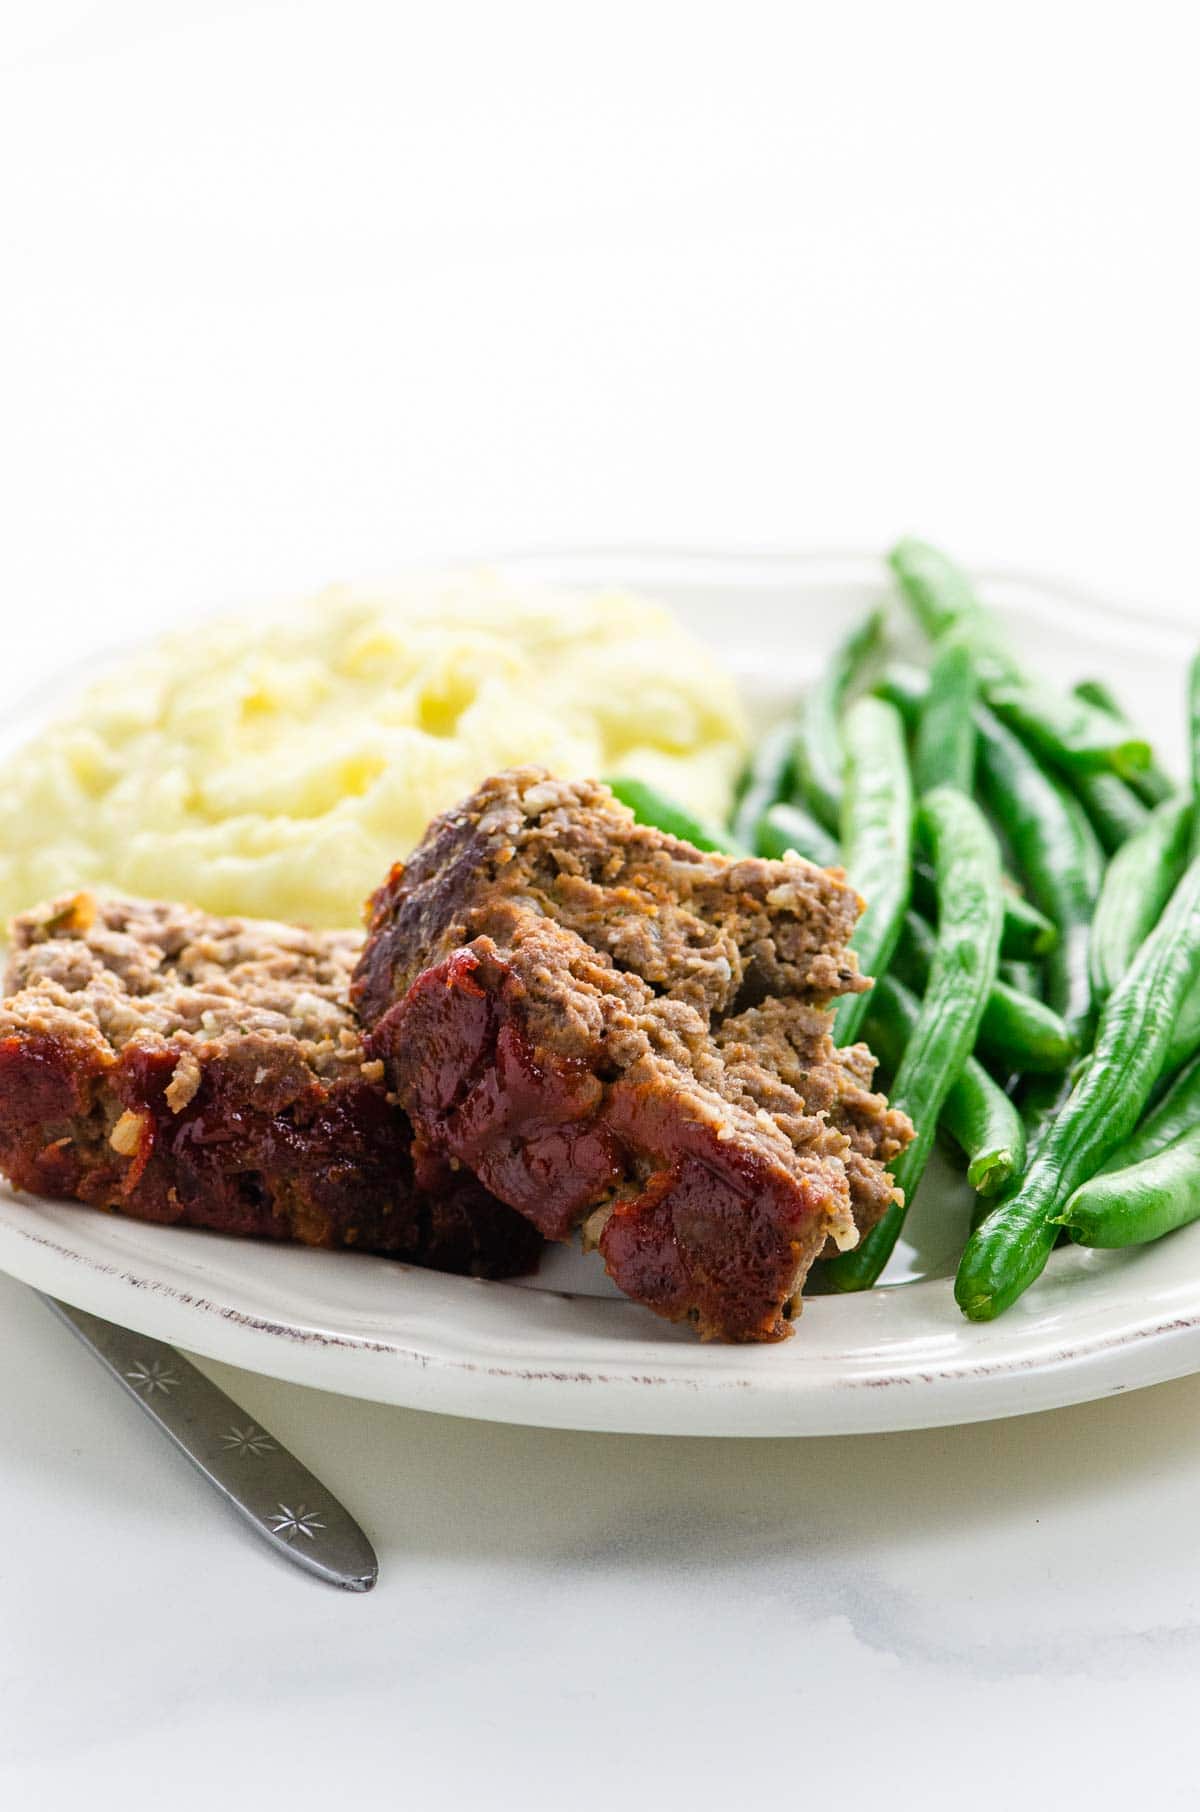 classic meatloaf recipe with mashed potatoes and green beans